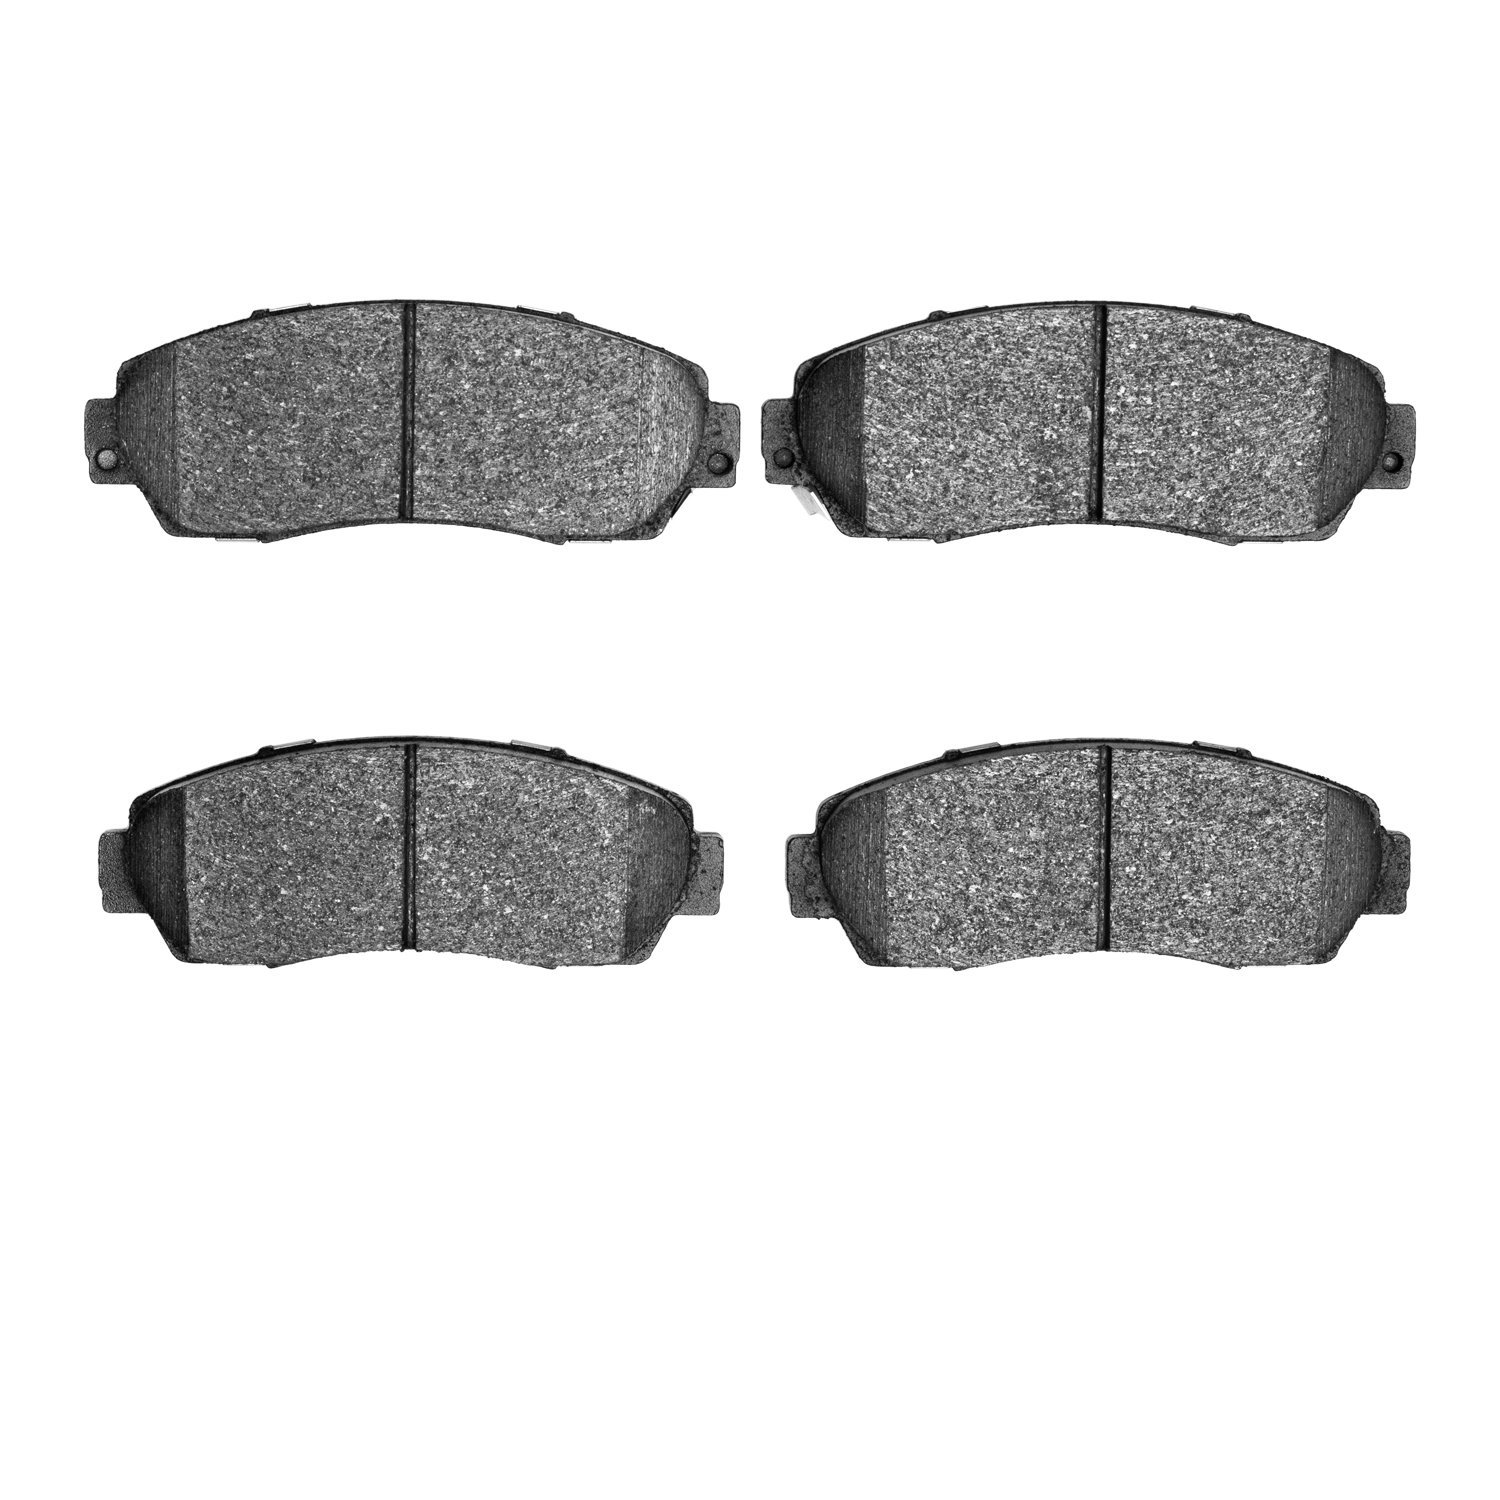 1310-1521-00 3000-Series Ceramic Brake Pads, Fits Select Multiple Makes/Models, Position: Front